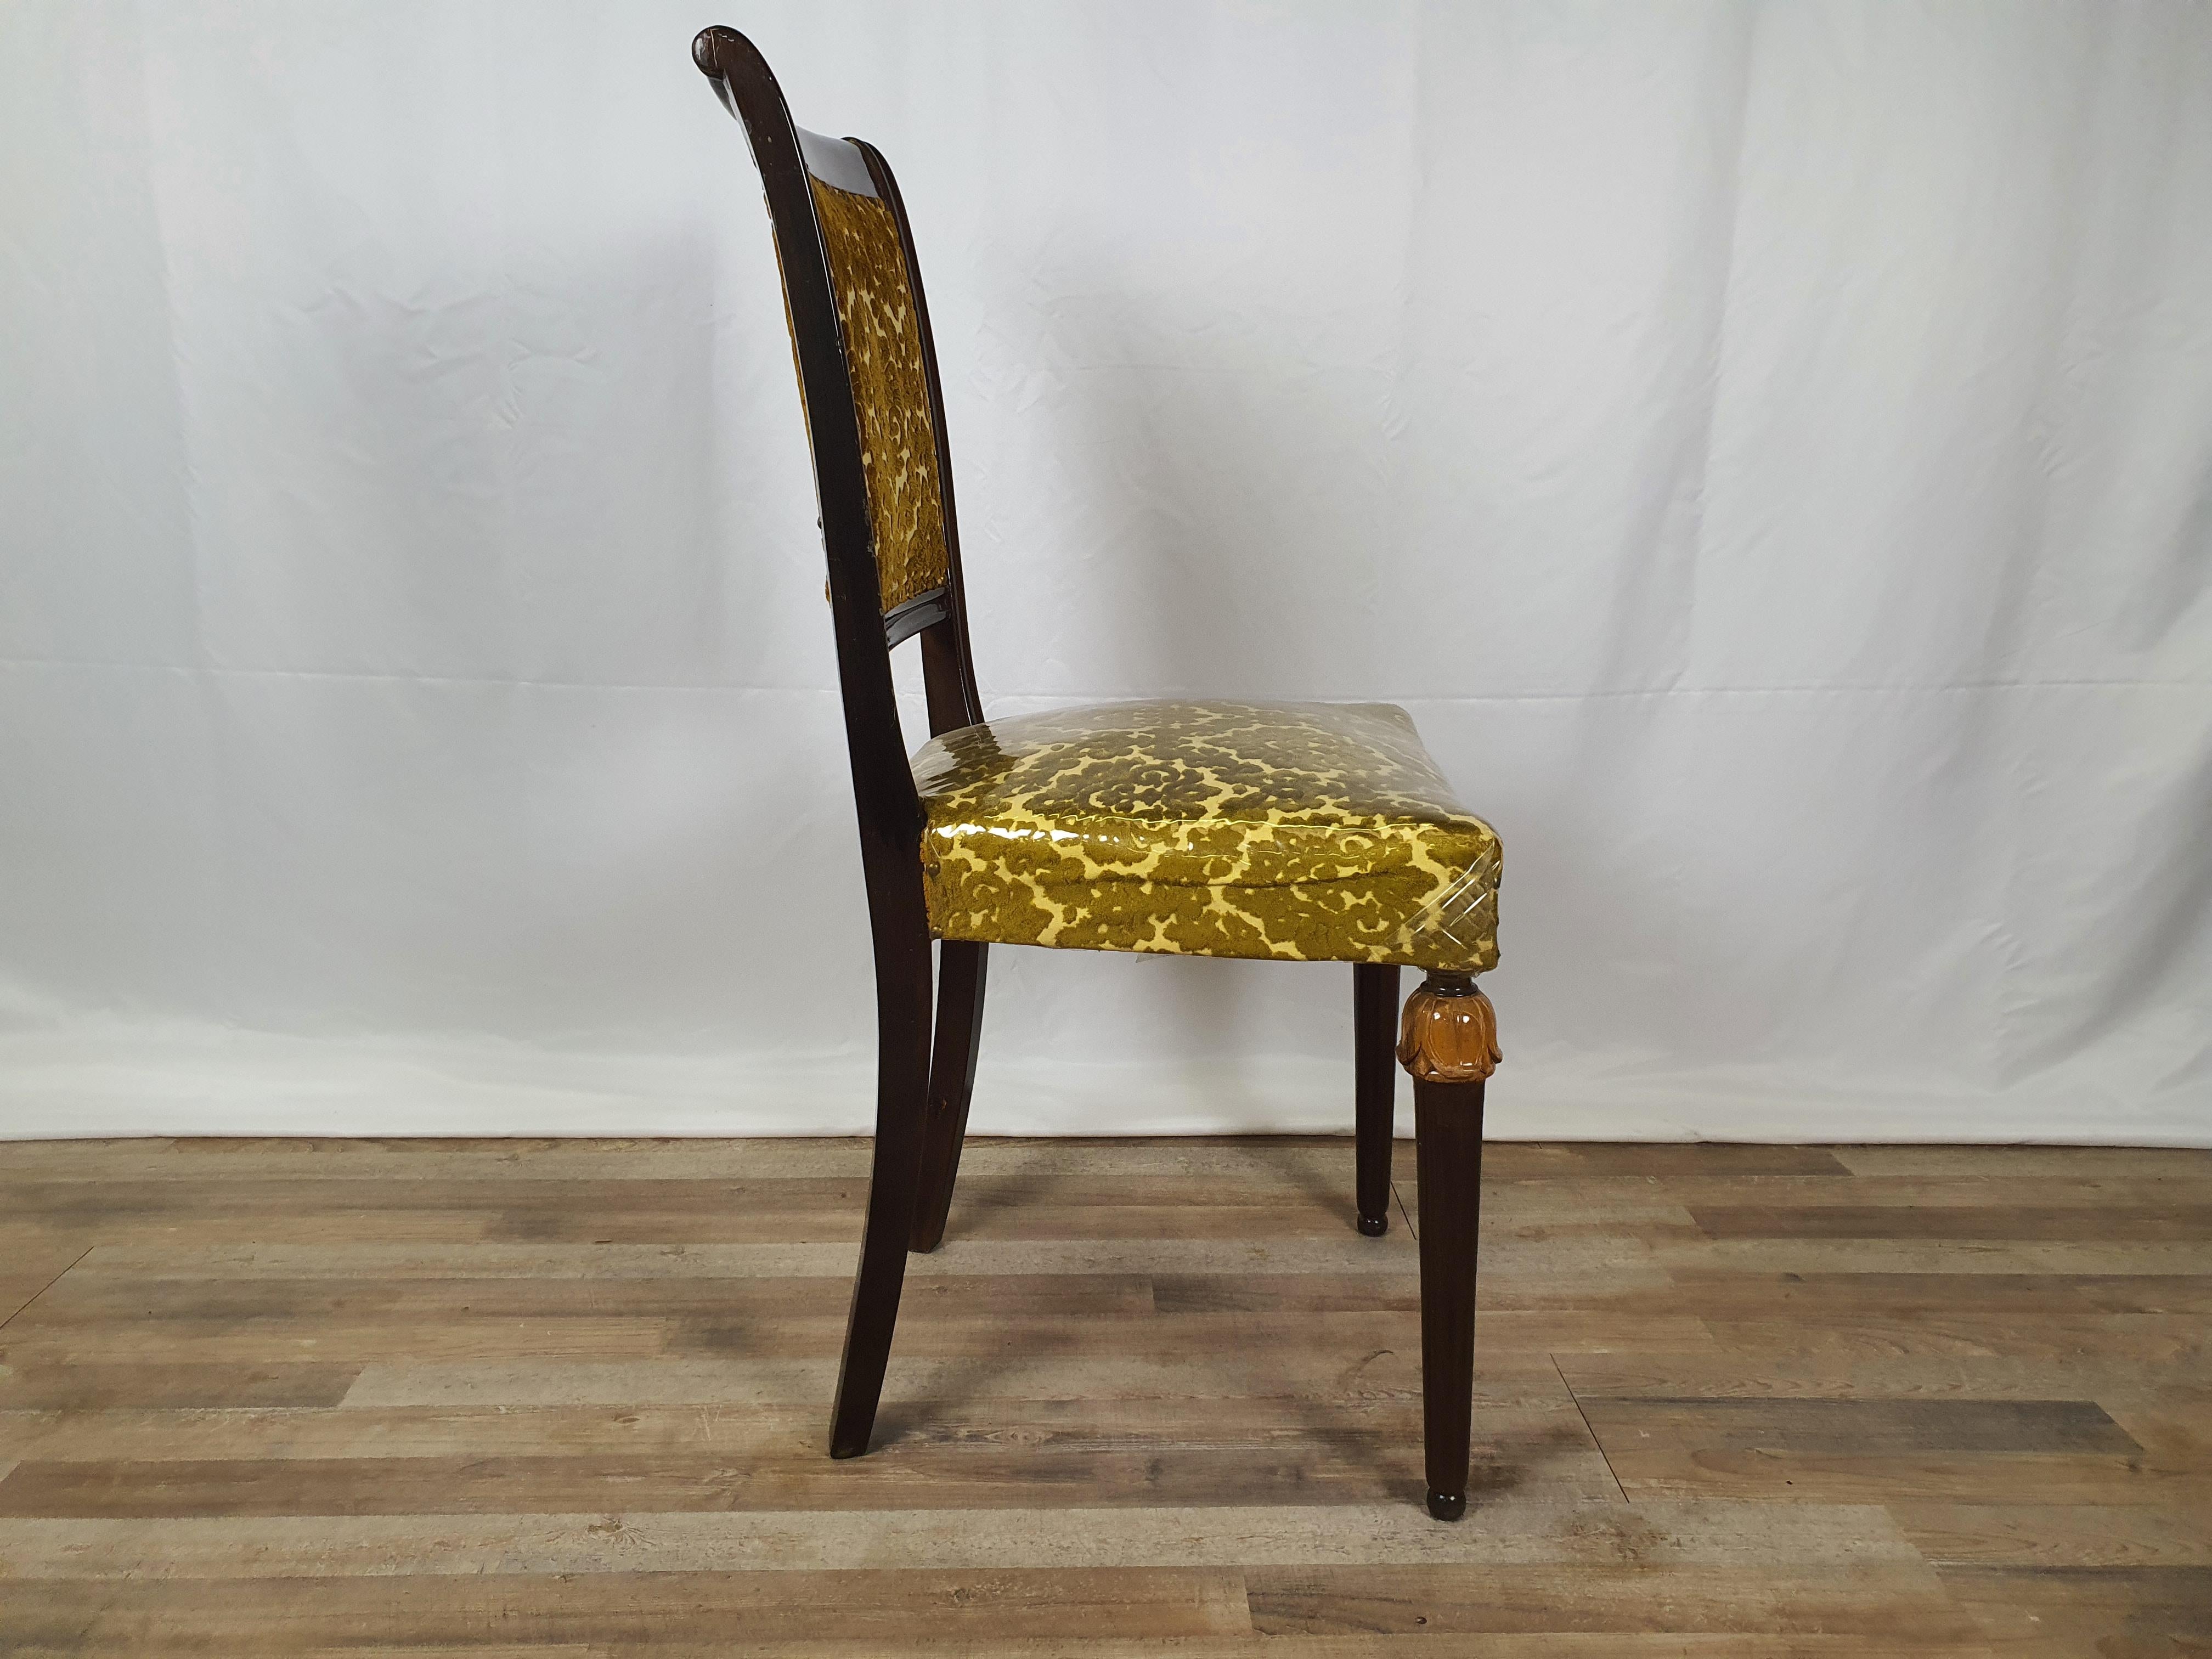 Single chair from the 1950s in wood with backrest and seat in the original fabric of the time.

Shows normal signs of wear, note how little it has been used. The seat is still protected with nylon as seen in the photos.